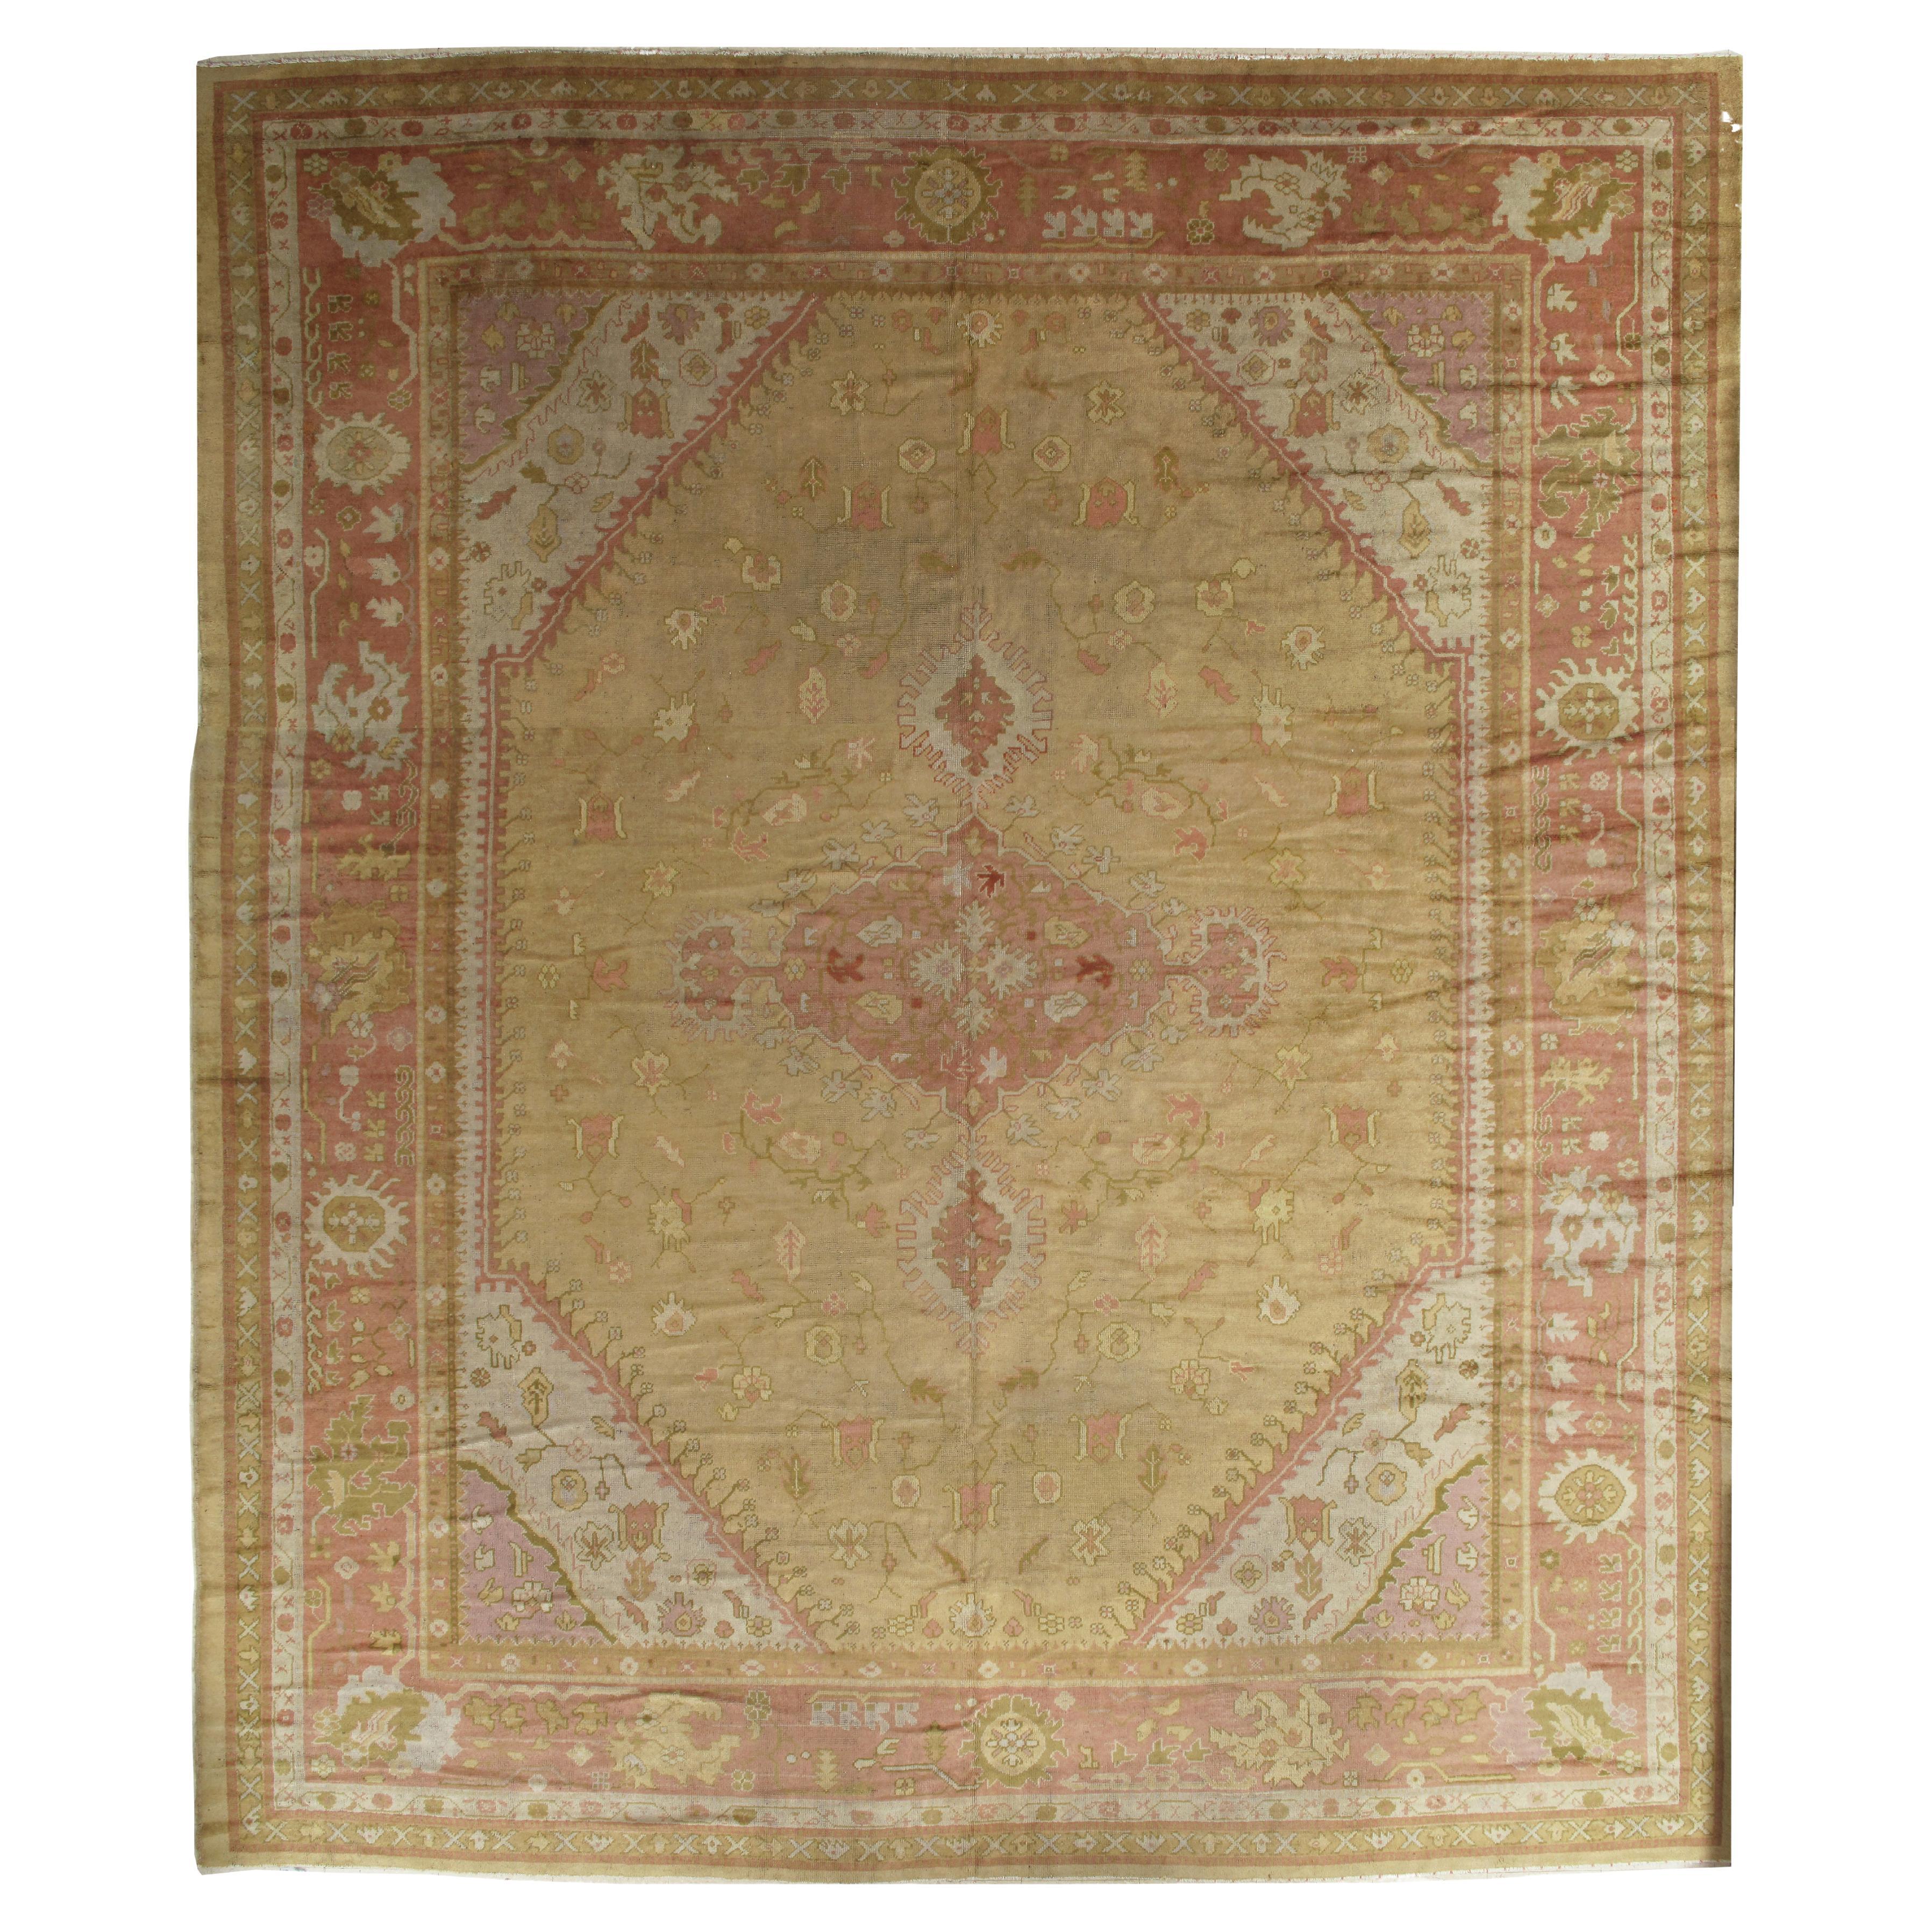 Antique Turkish Oushak Carpet, Handmade Oriental Rug, Gold, Coral, Green, Taupe For Sale